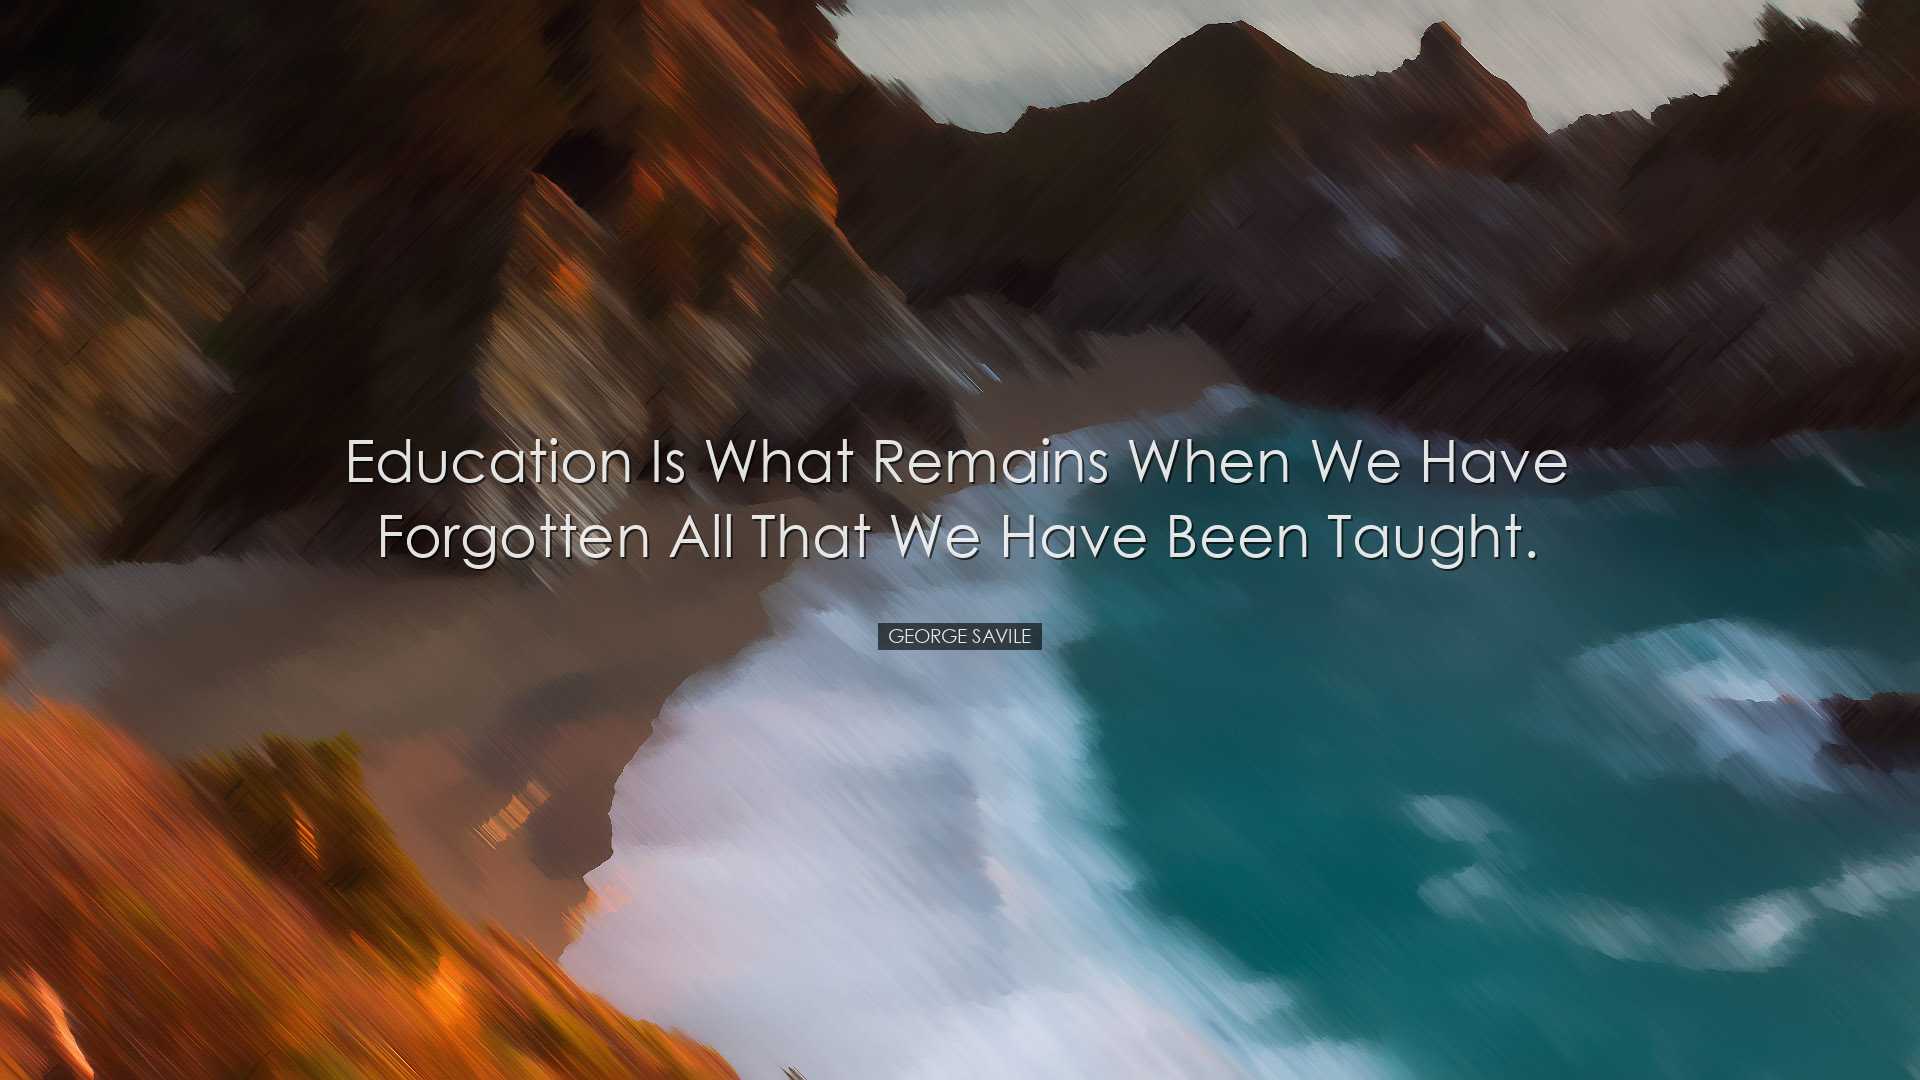 Education is what remains when we have forgotten all that we have